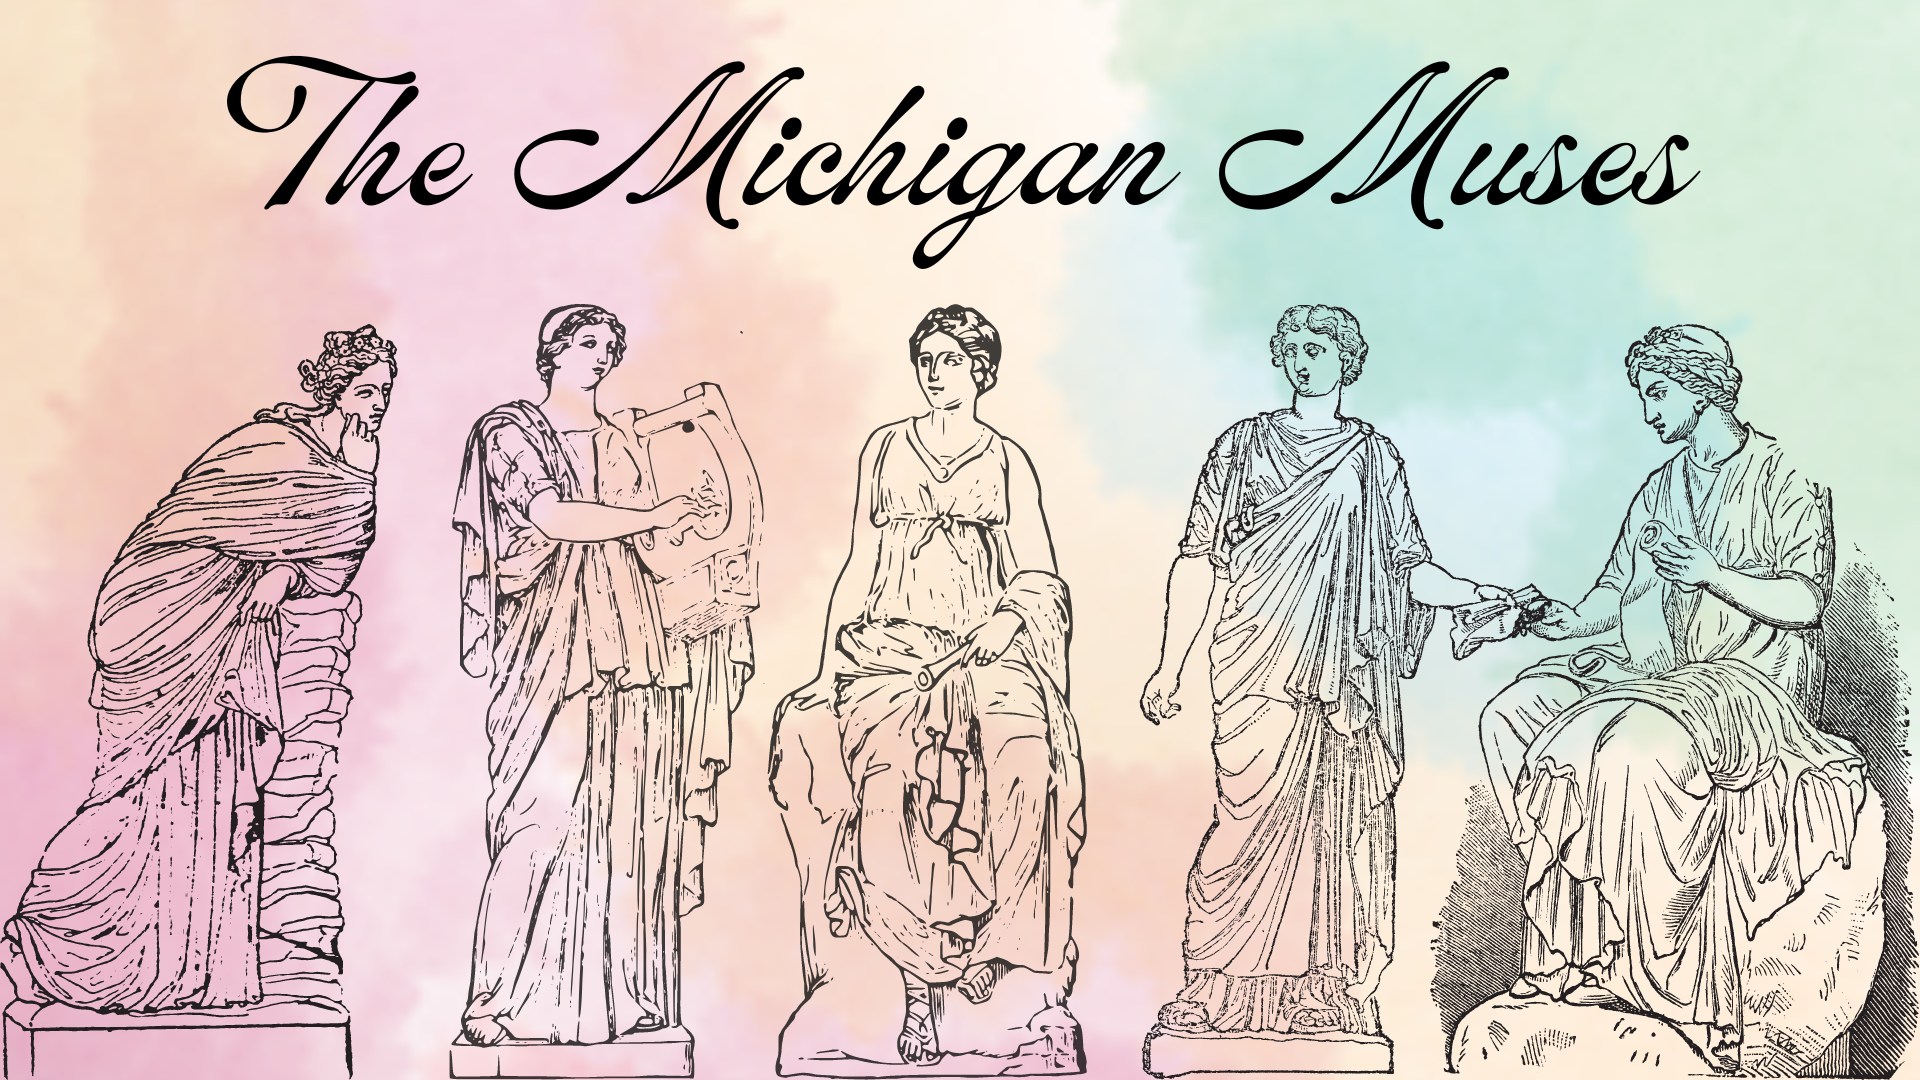 muse like statues pose as the logo fo michigan muses choir